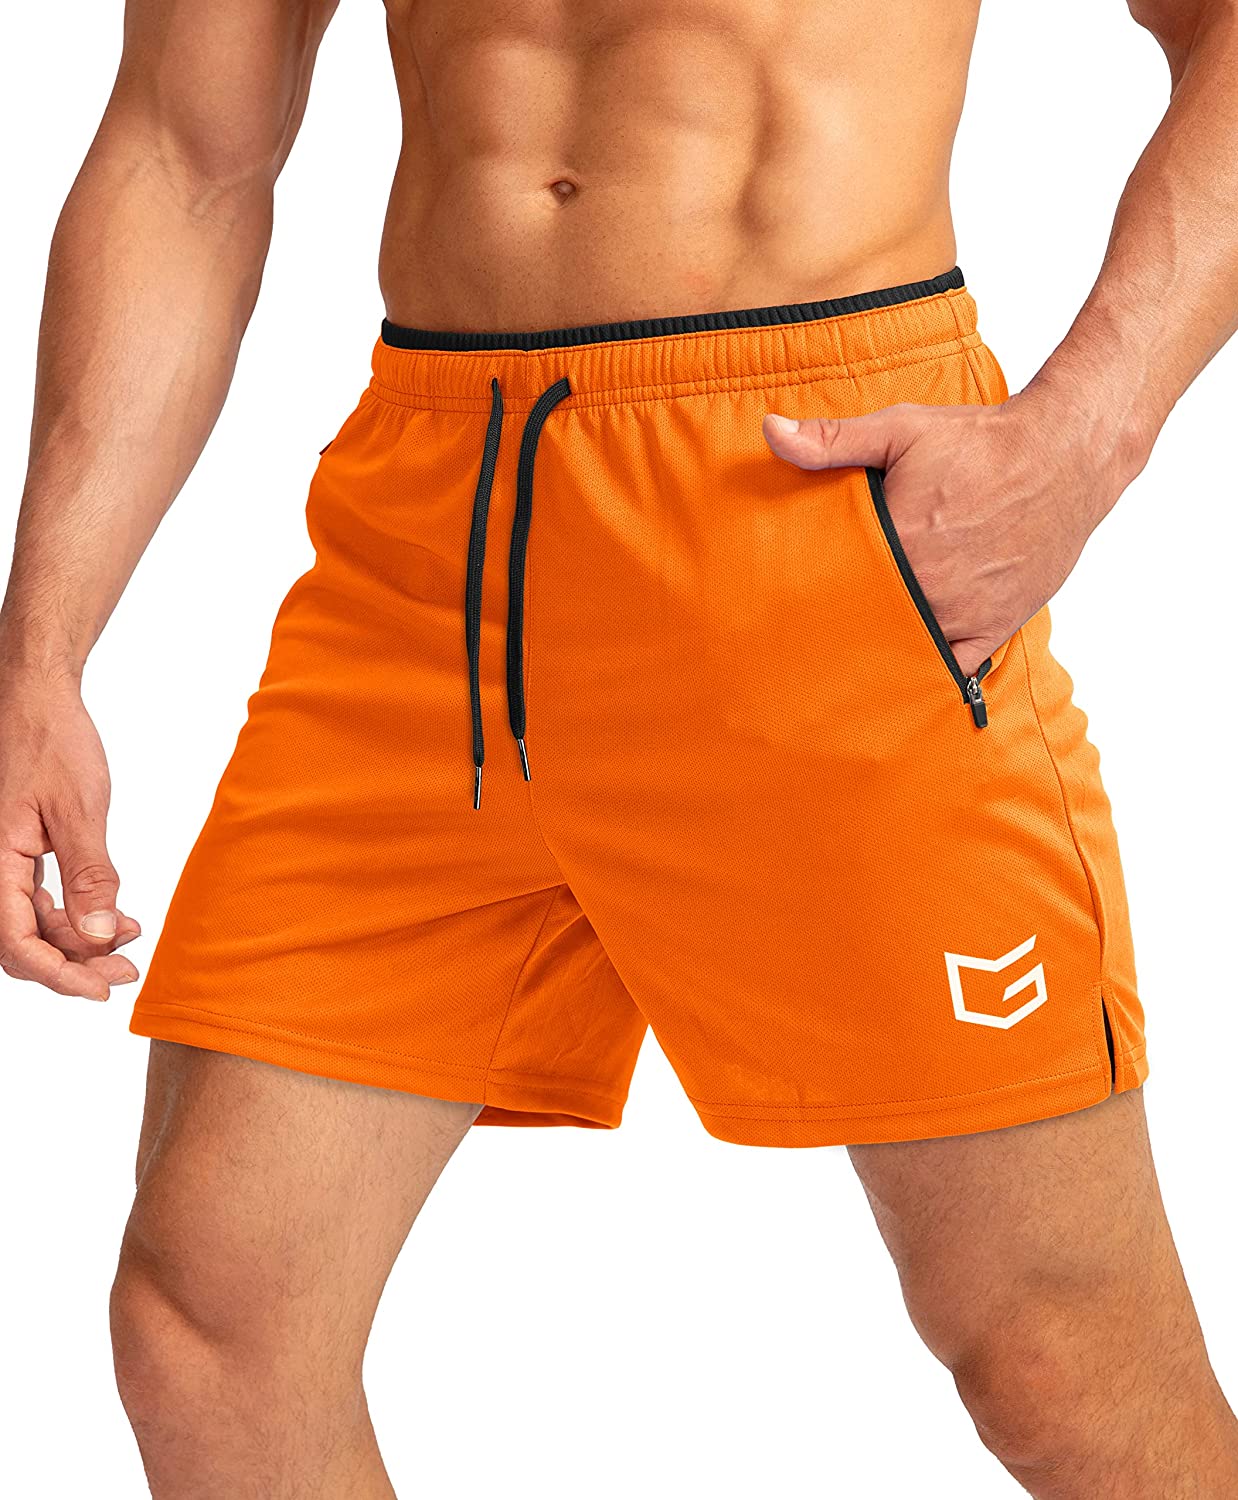 G Gradual Men's 7 Athletic Gym Shorts Quick Dry Workout Running Shorts with Zipper Pockets 